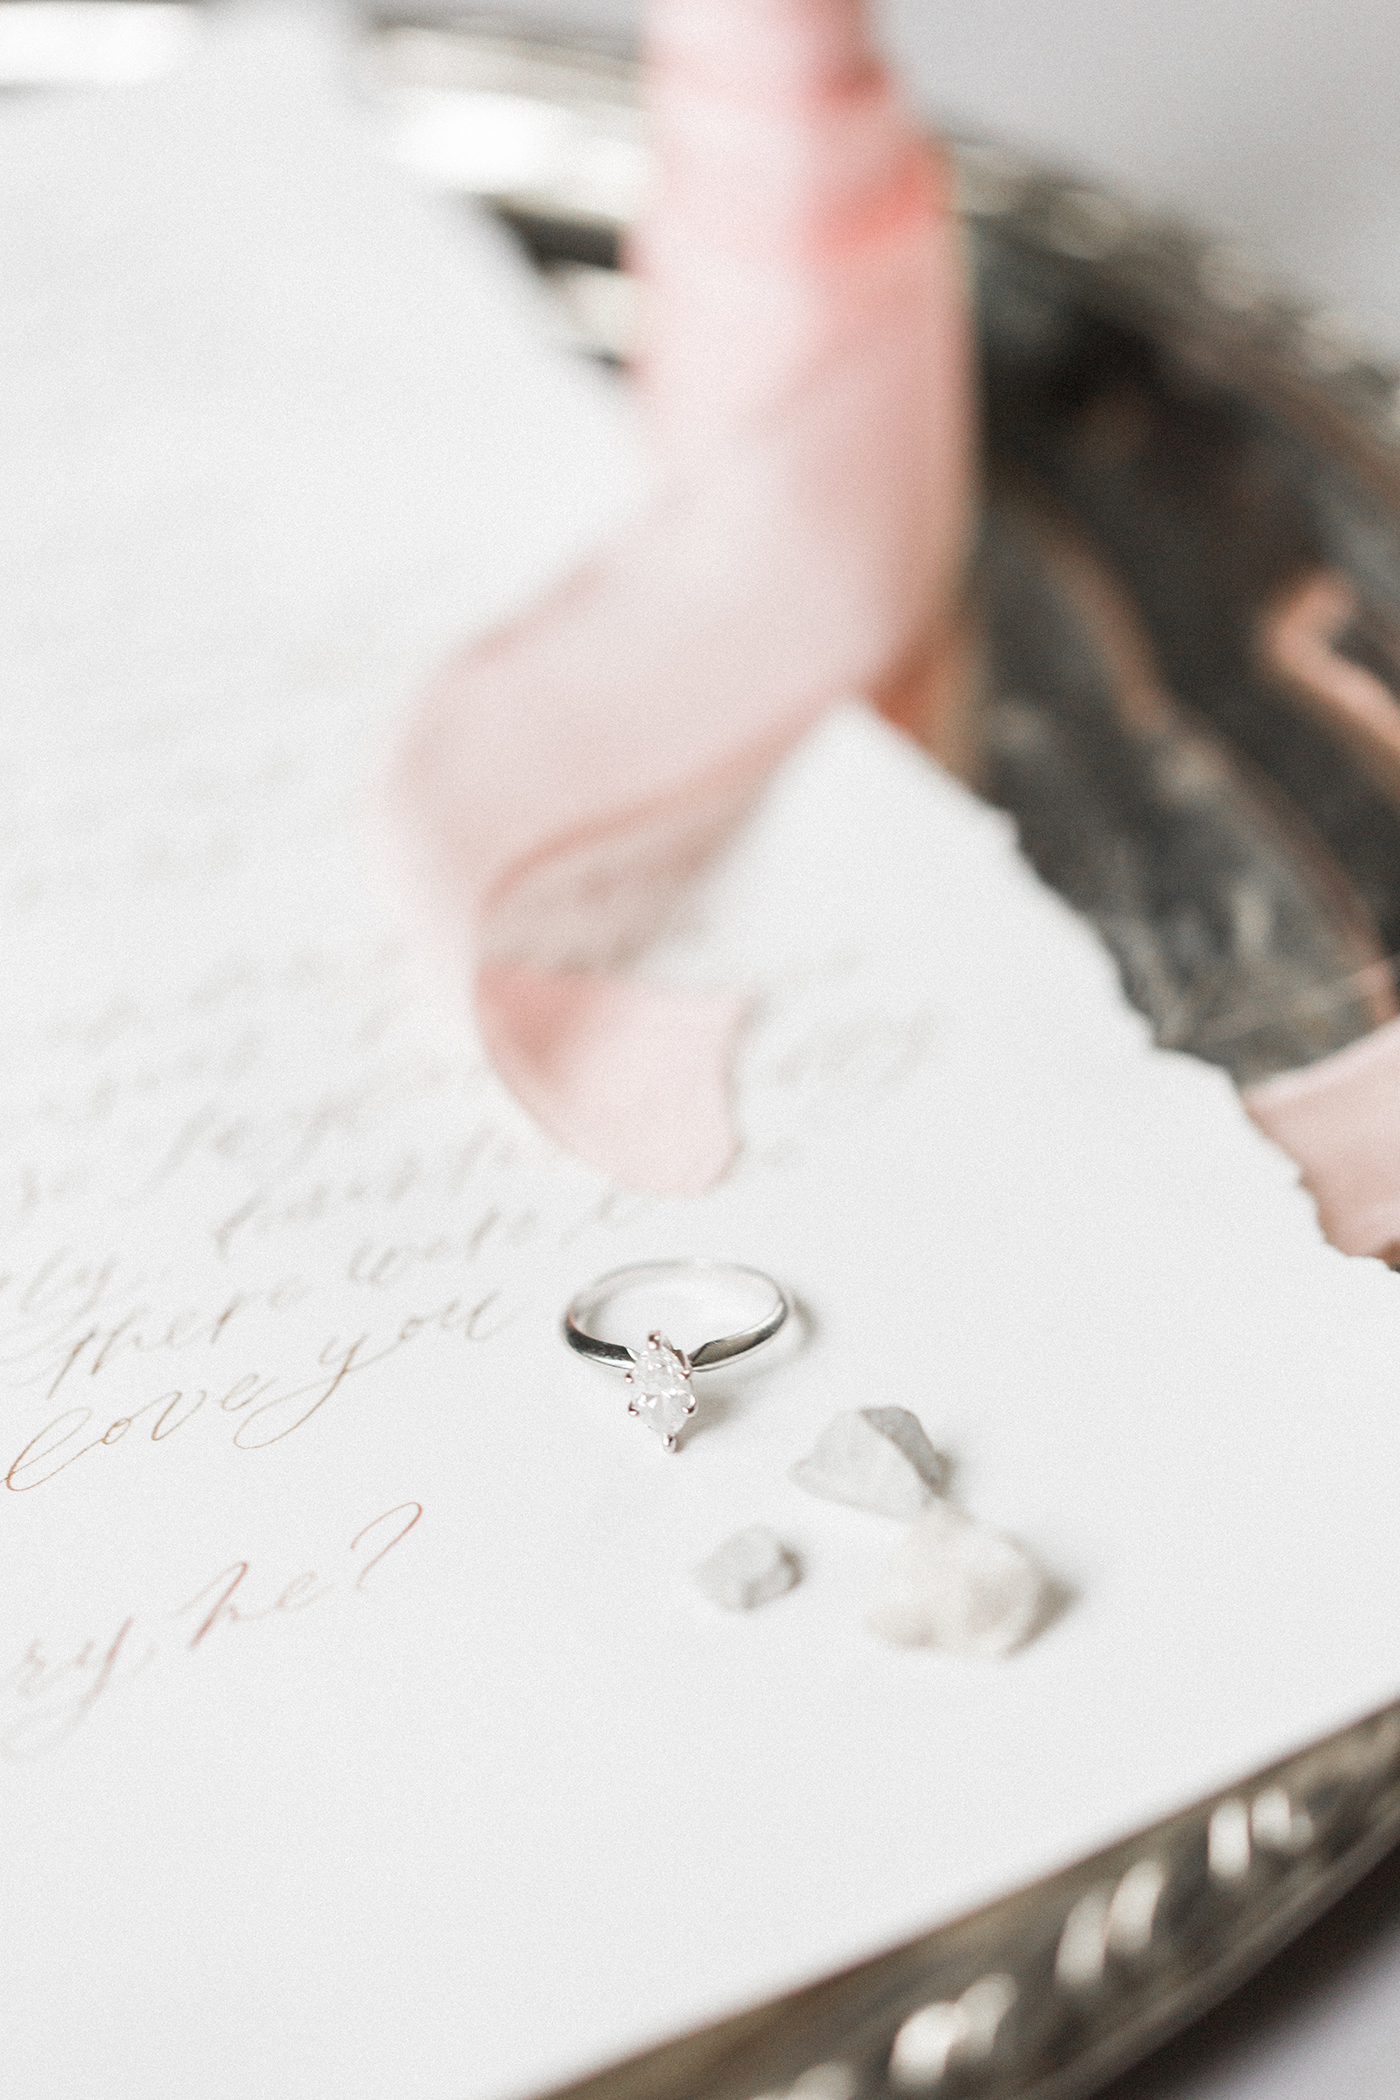 It is Well - Wedding Calligraphy Vows - Sarah Ann Design - Proposal Calligraphy